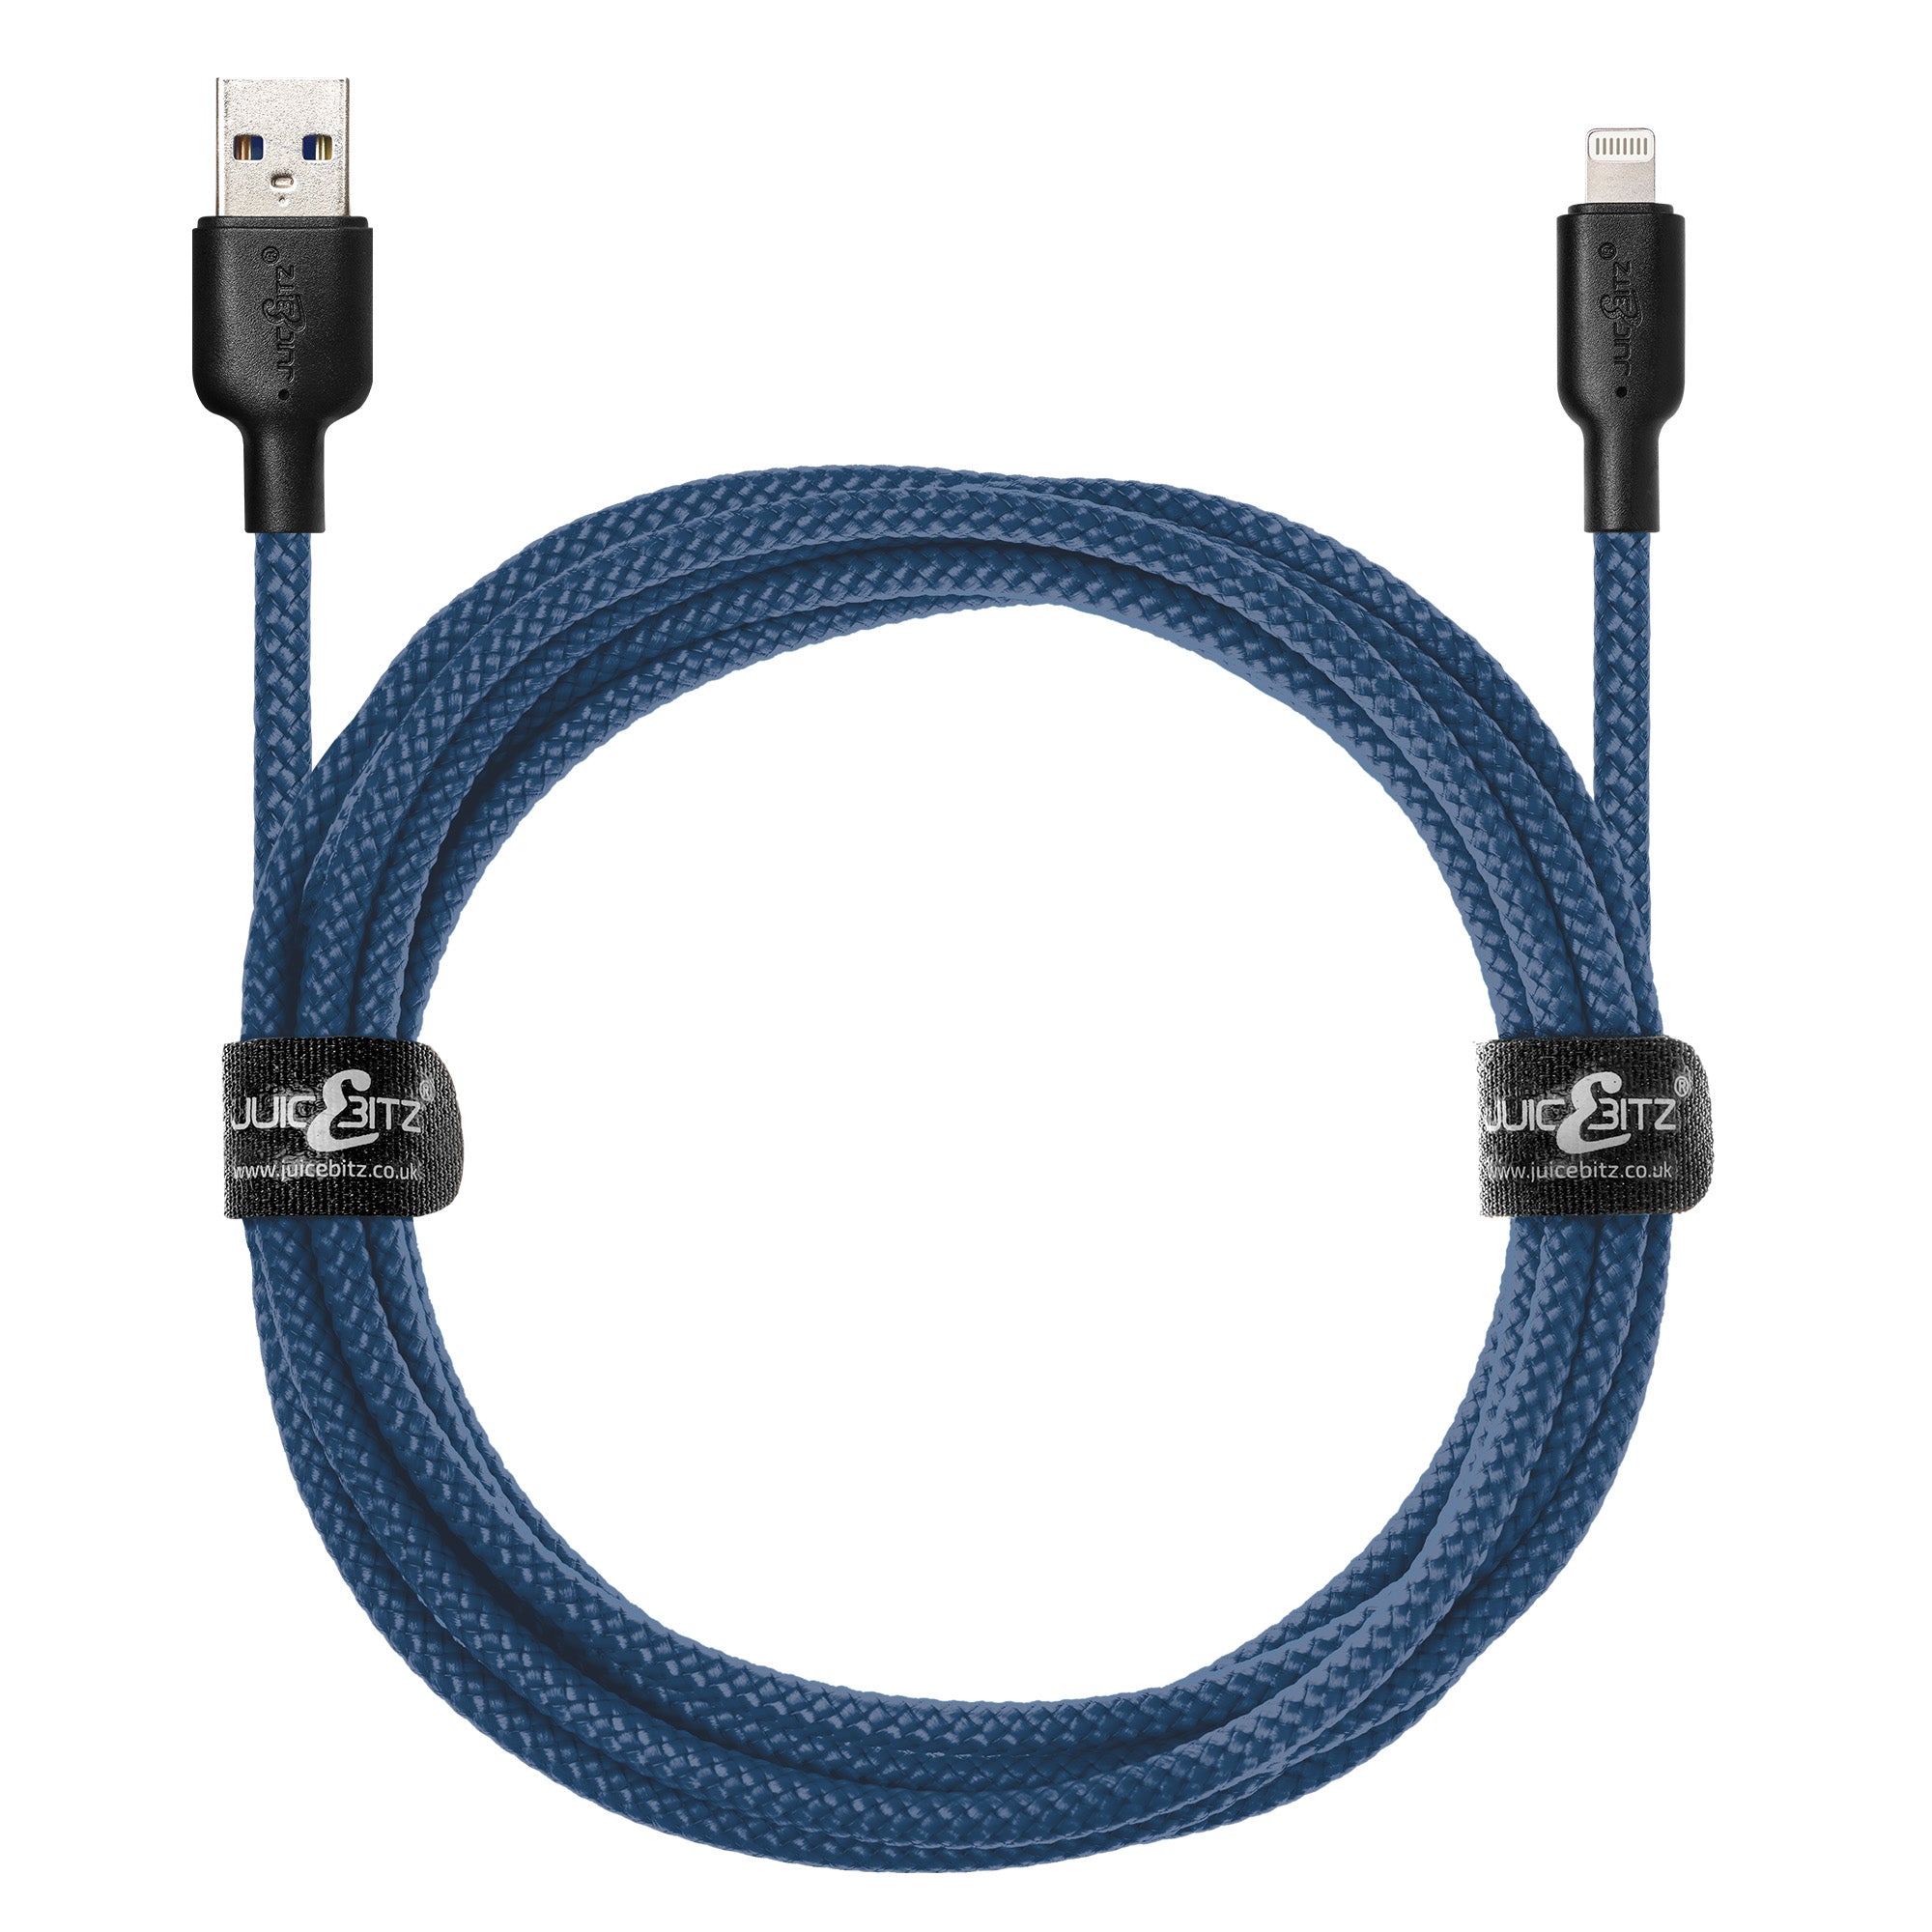 Braided Heavy Duty USB Charger Cable Data Sync Wire Lead for iPhone, iPad, iPod - Navy